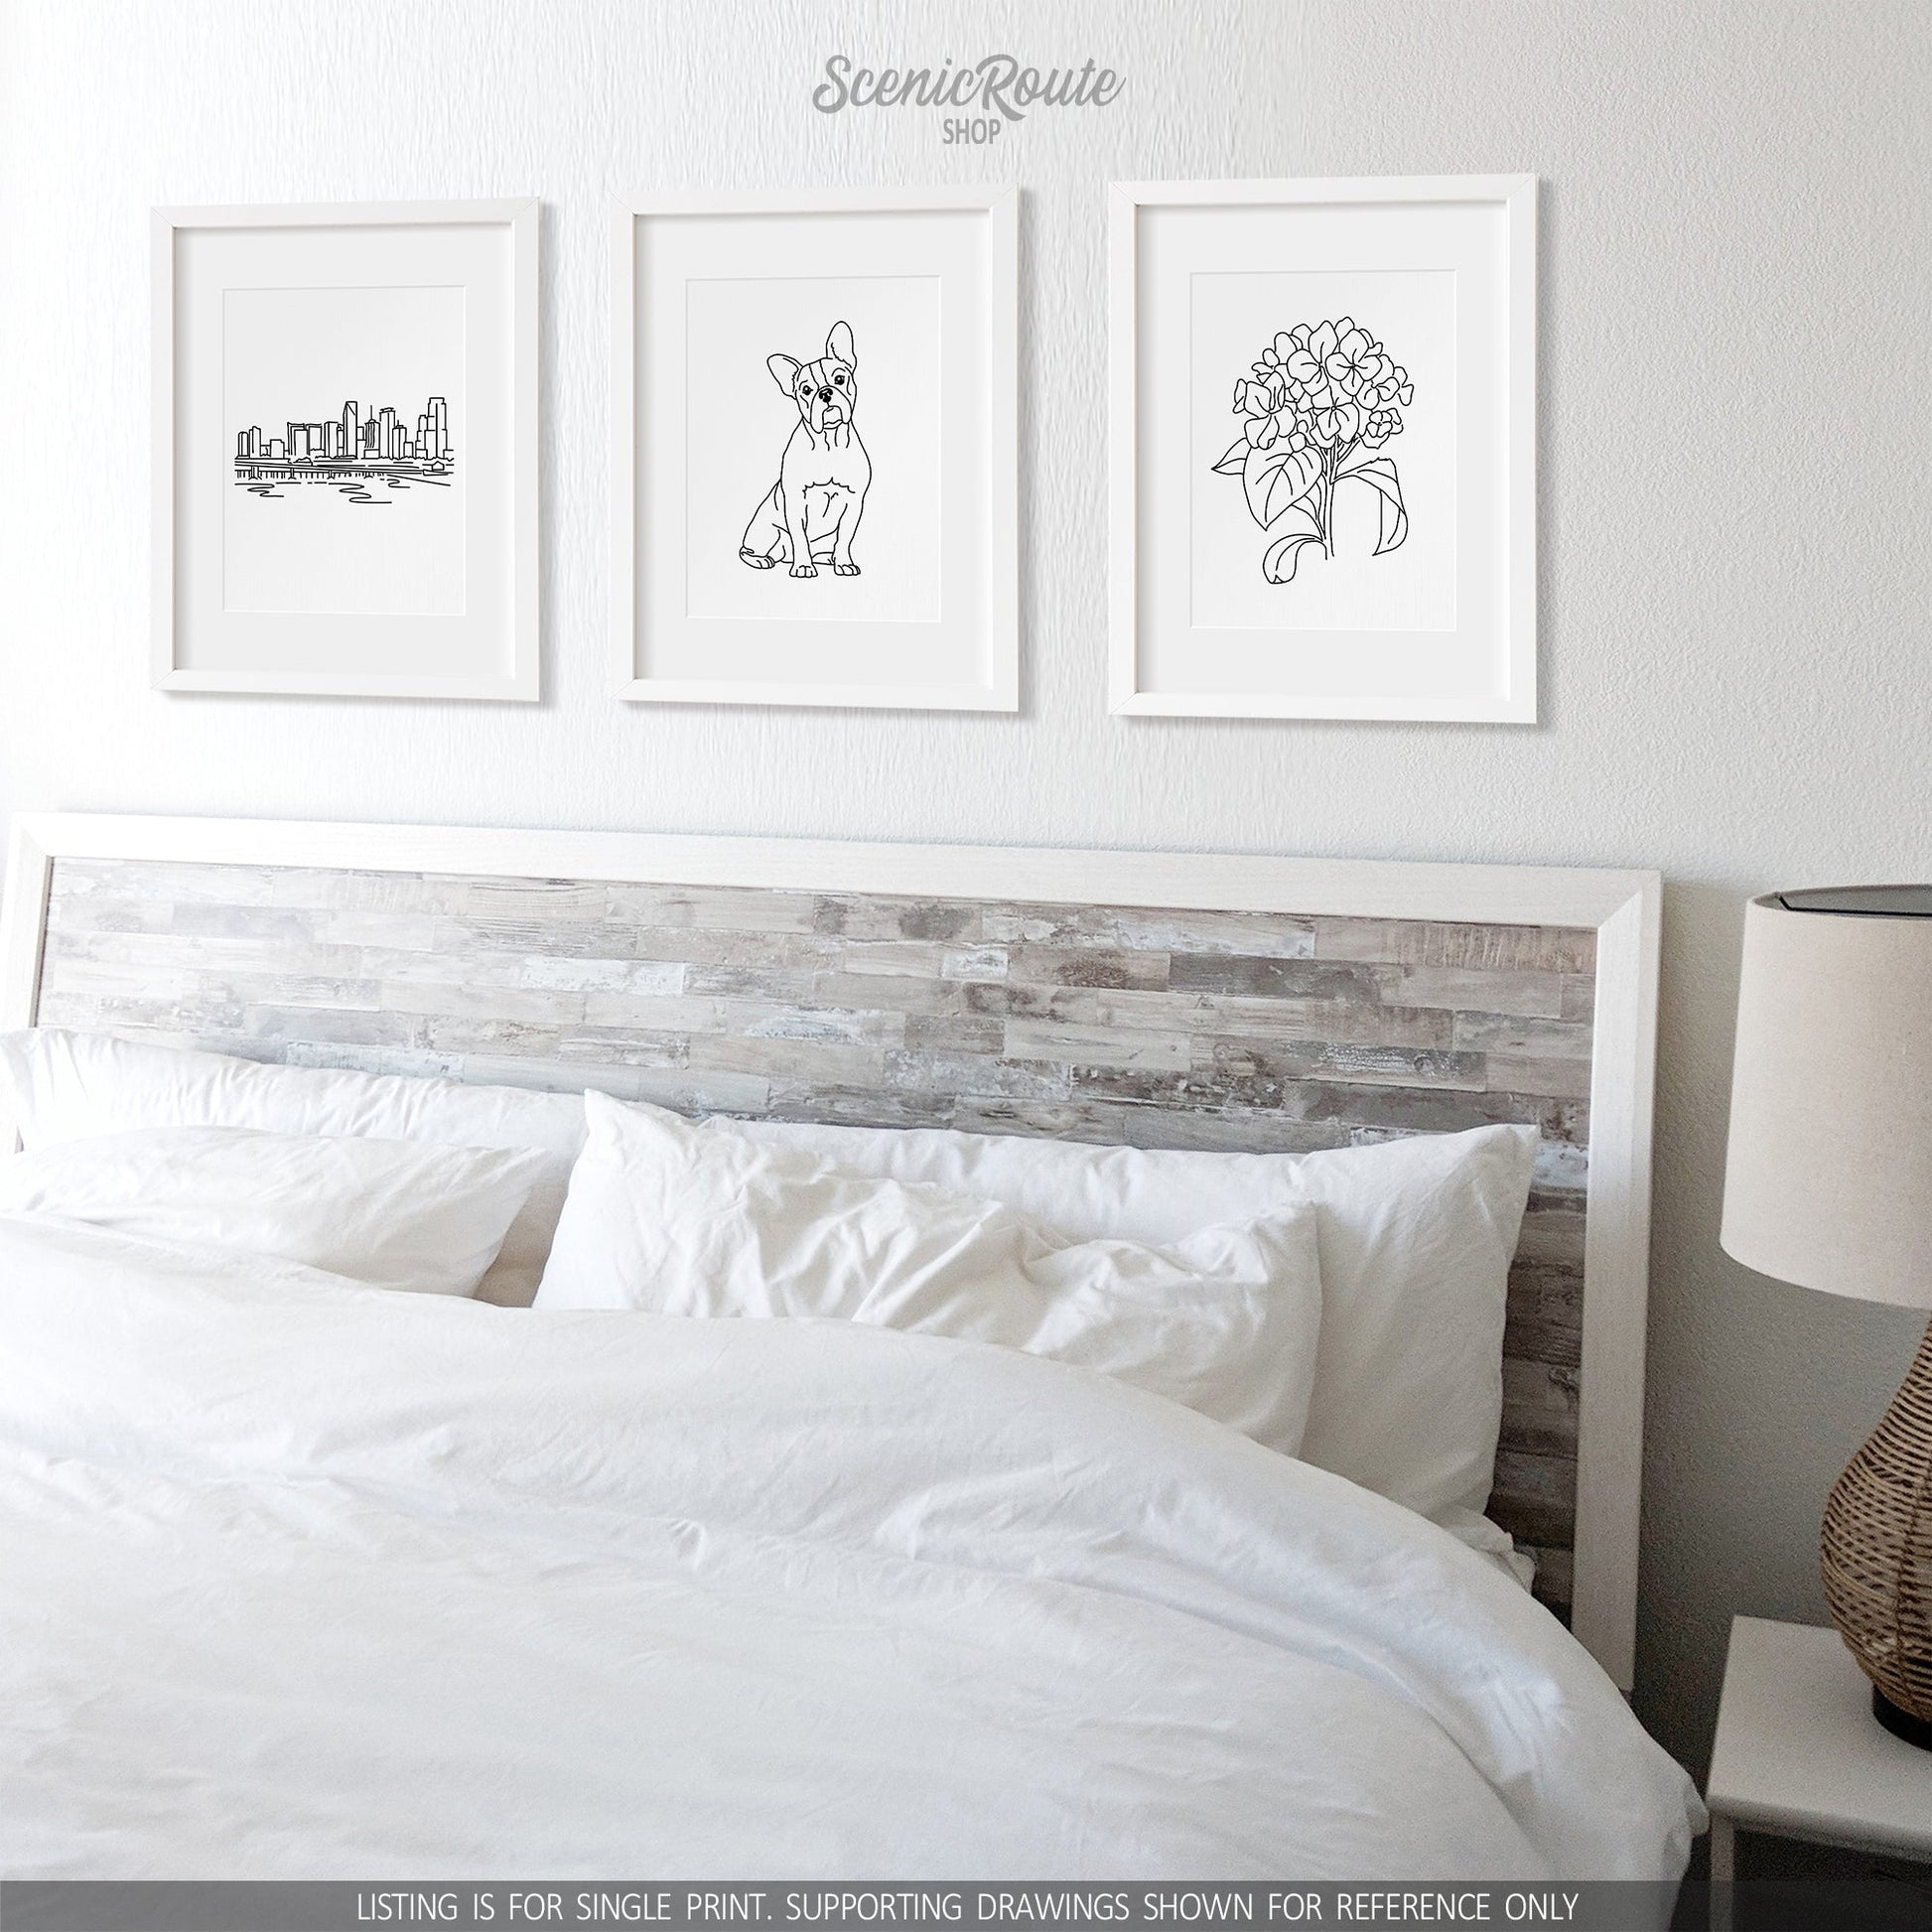 A group of three framed drawings on a white wall above a bed with white sheets and nightstand with a lamp. The line art drawings include the Miami Skyline, a Boston Terrier dog, and a Hydrangea Flower